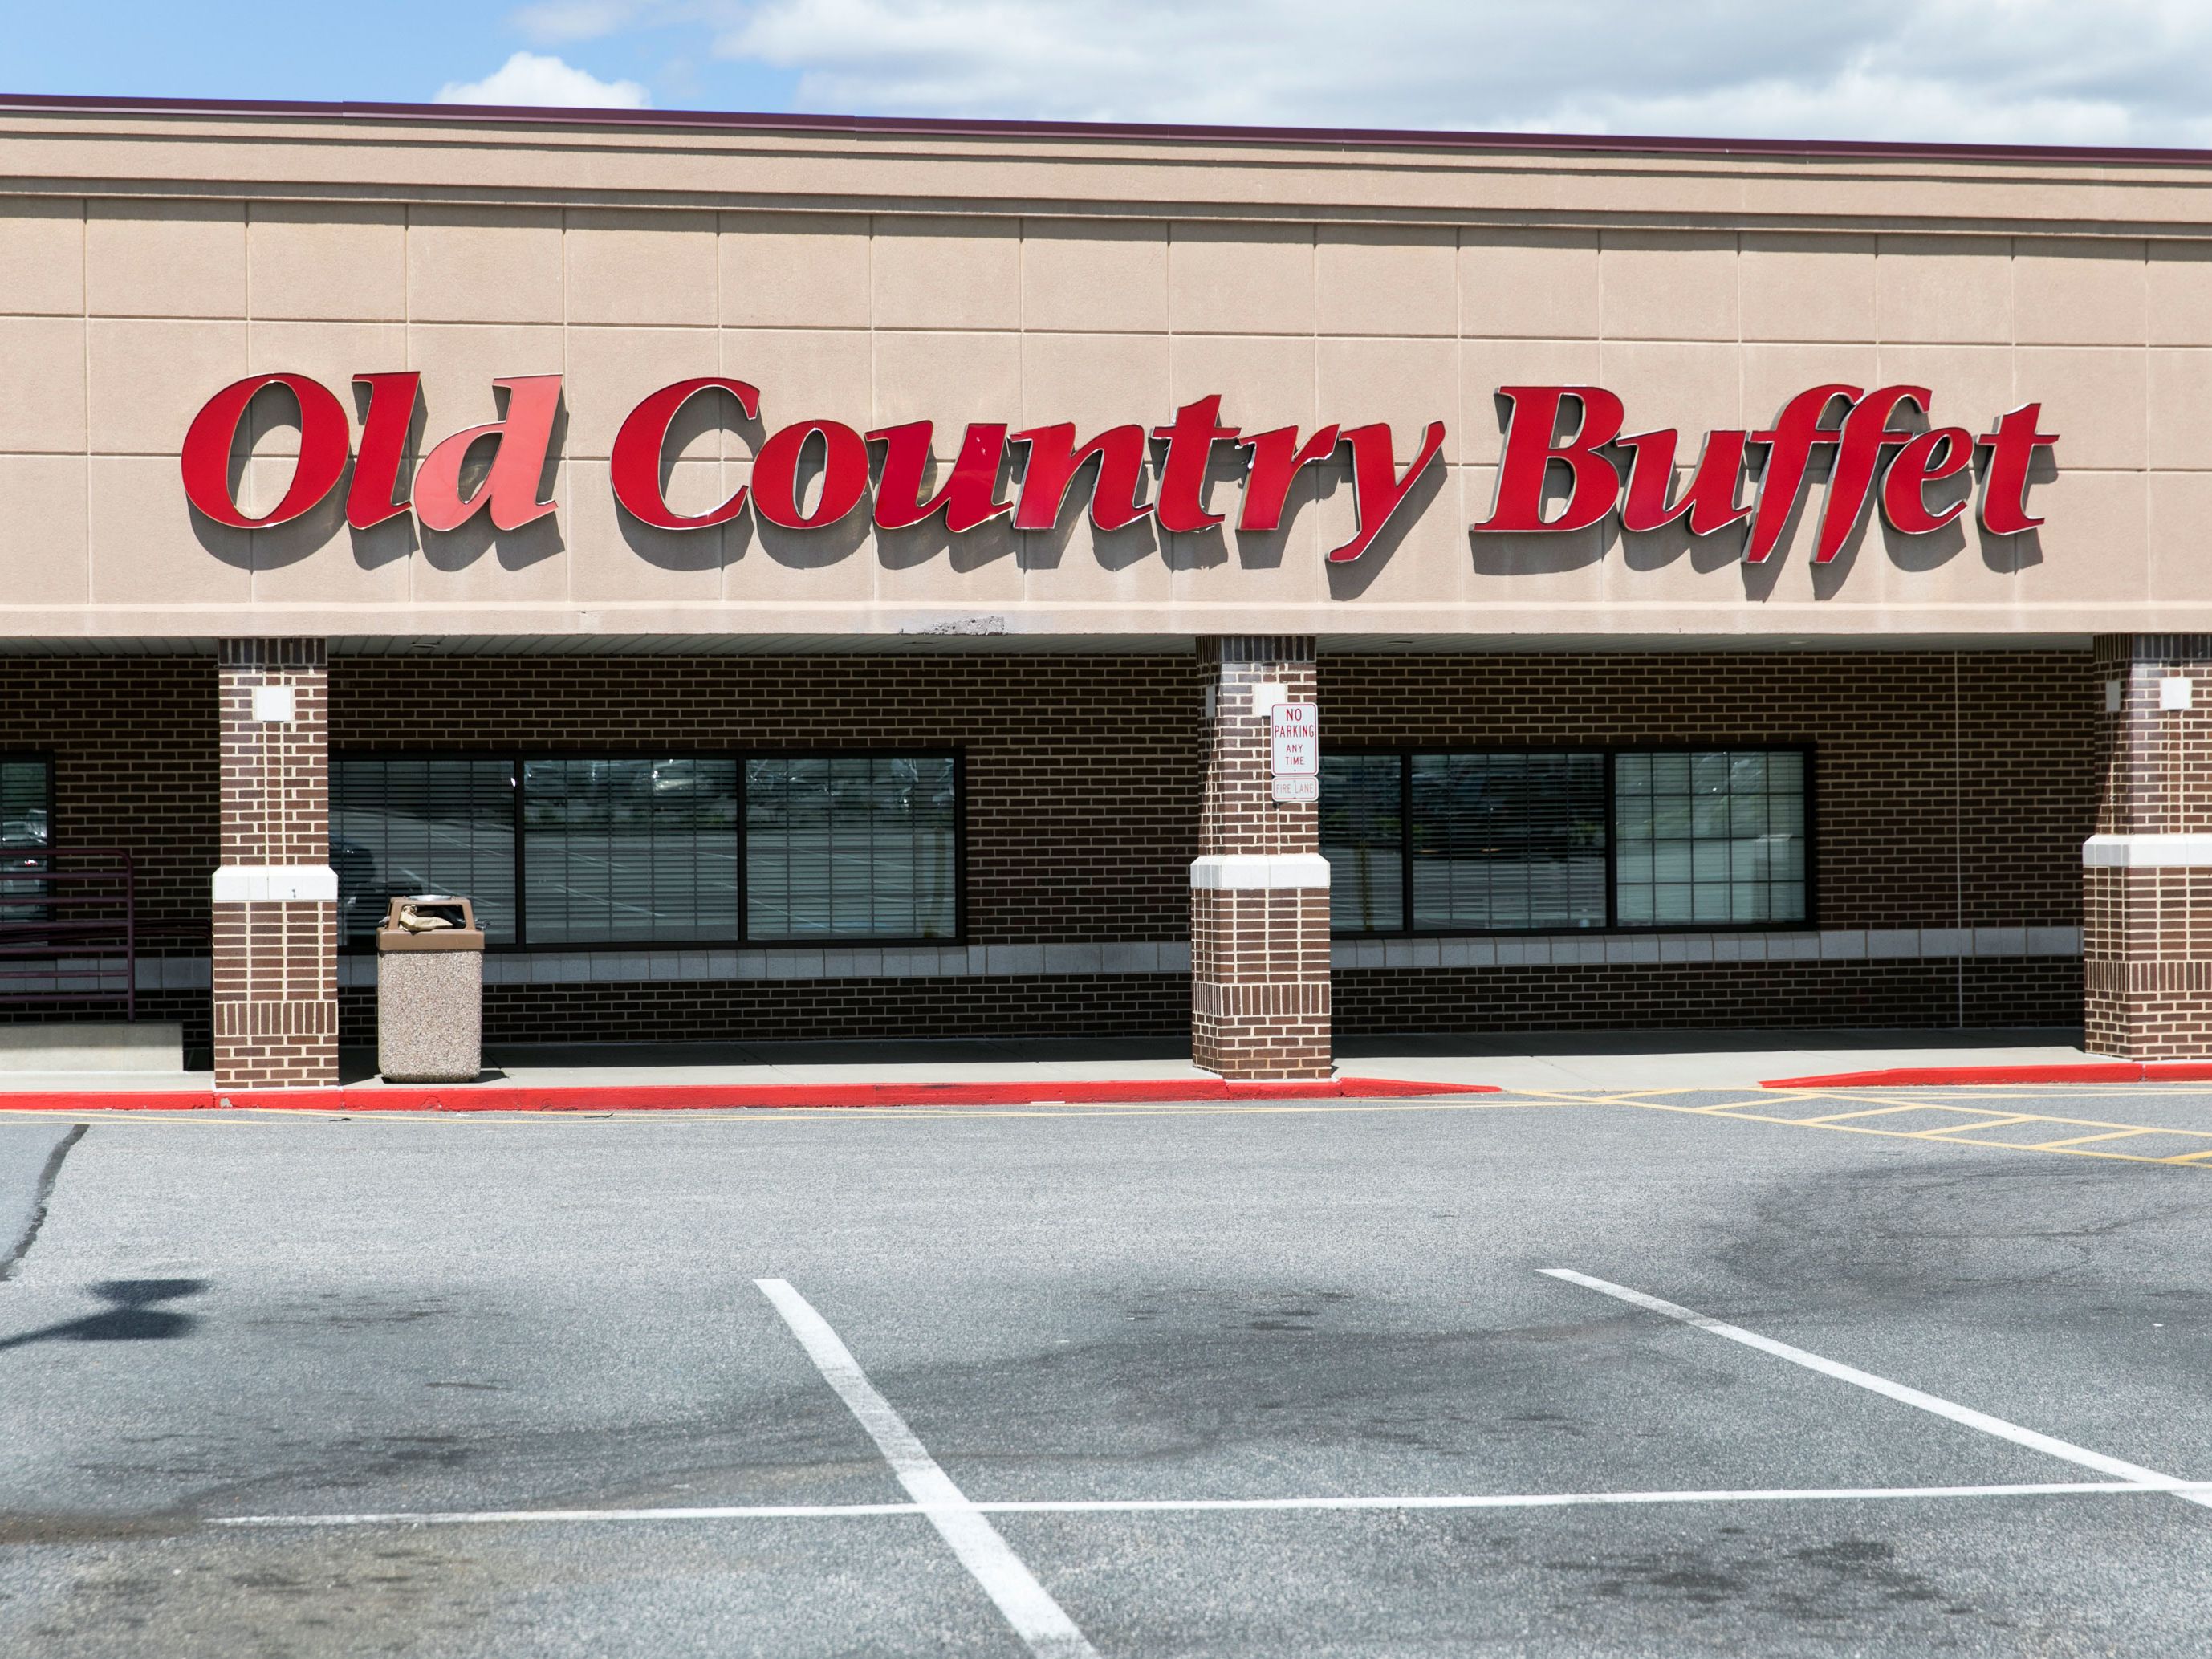 The parent company of Old Country Buffet filed for bankruptcy | CNN Business